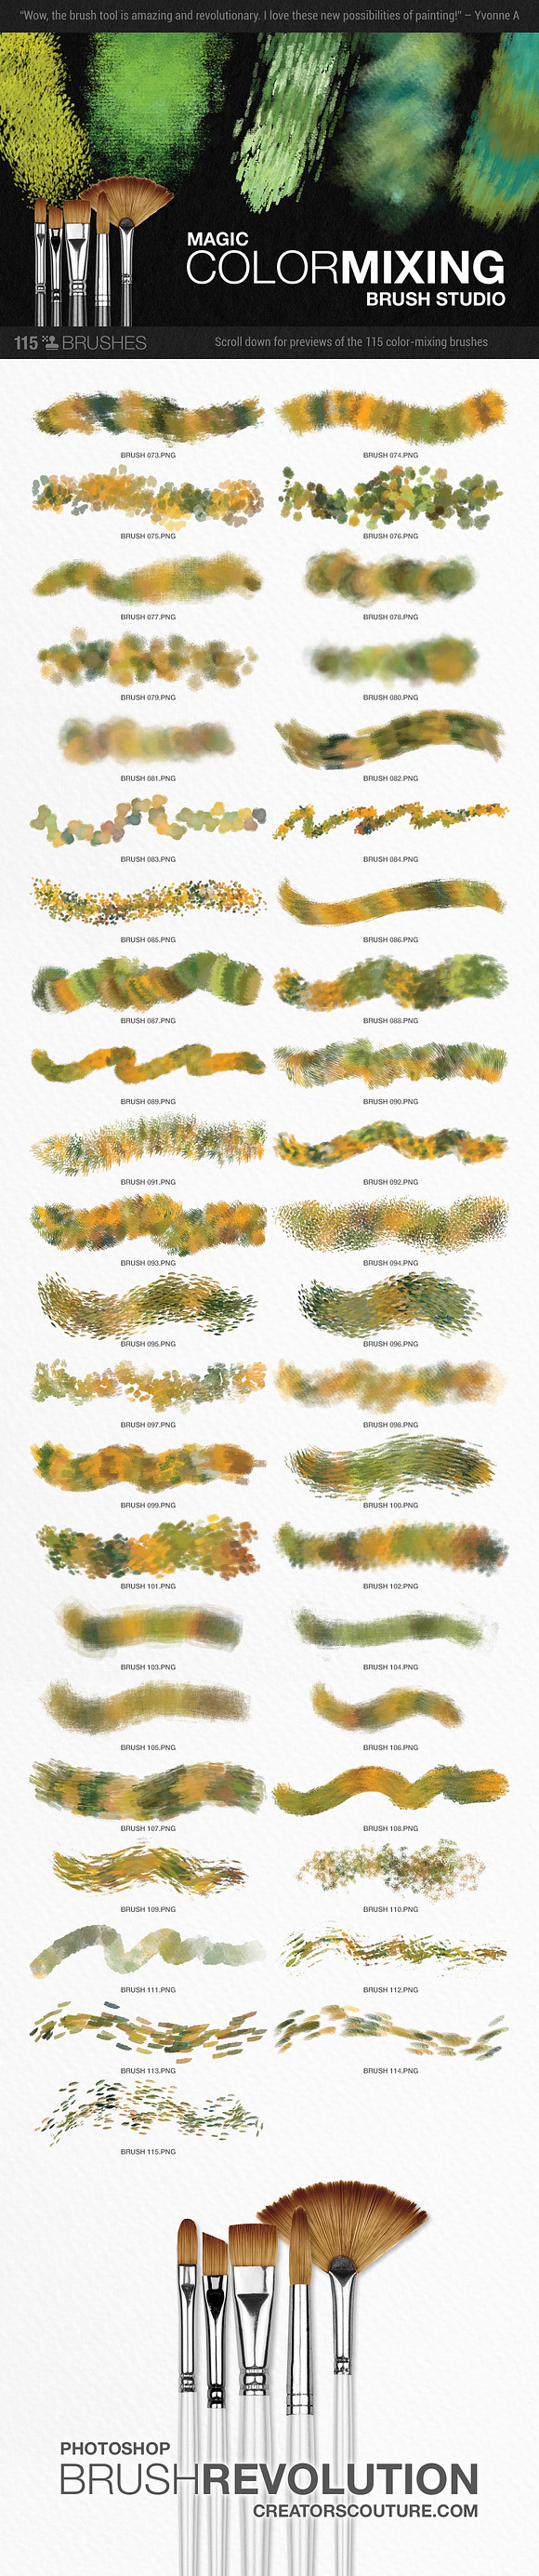 Modern Impressionist PS Brush Studio in Photoshop Brushes - product preview 5